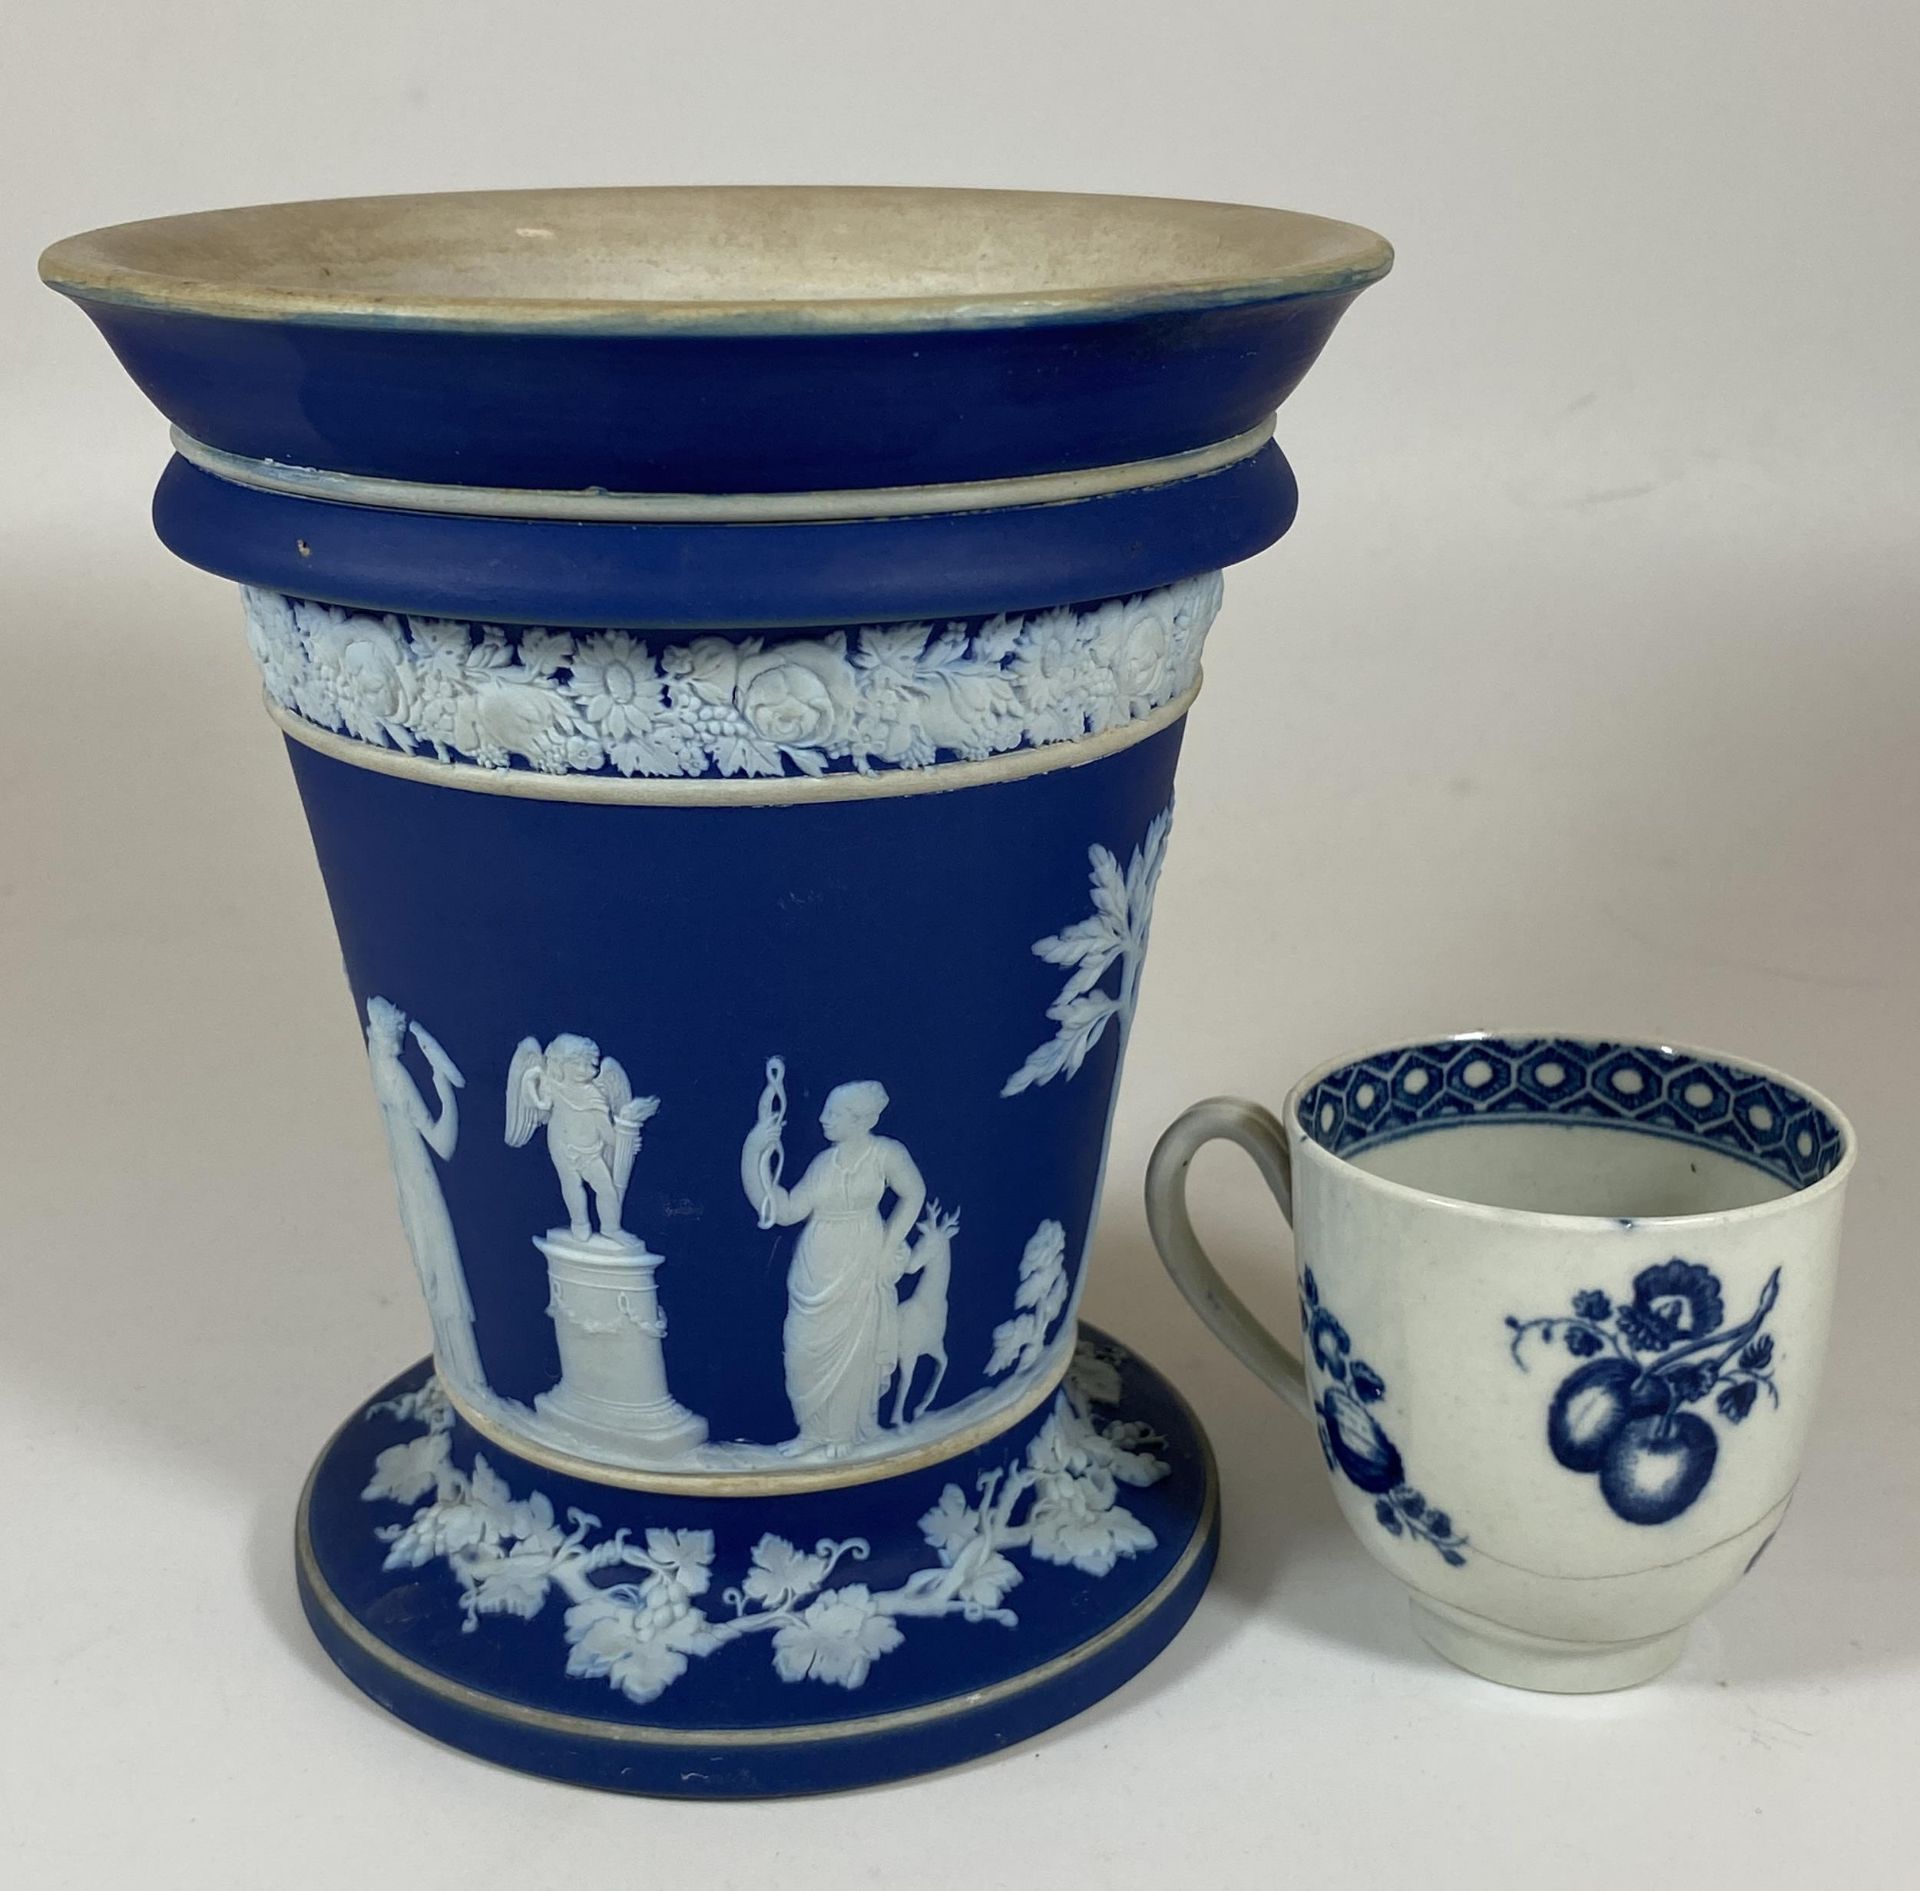 TWO ITEMS - A 19TH CENTURY WEDGWOOD JASPERWARE DIP VASE AND 18TH CENTURY WORCESTER BLUE AND WHITE